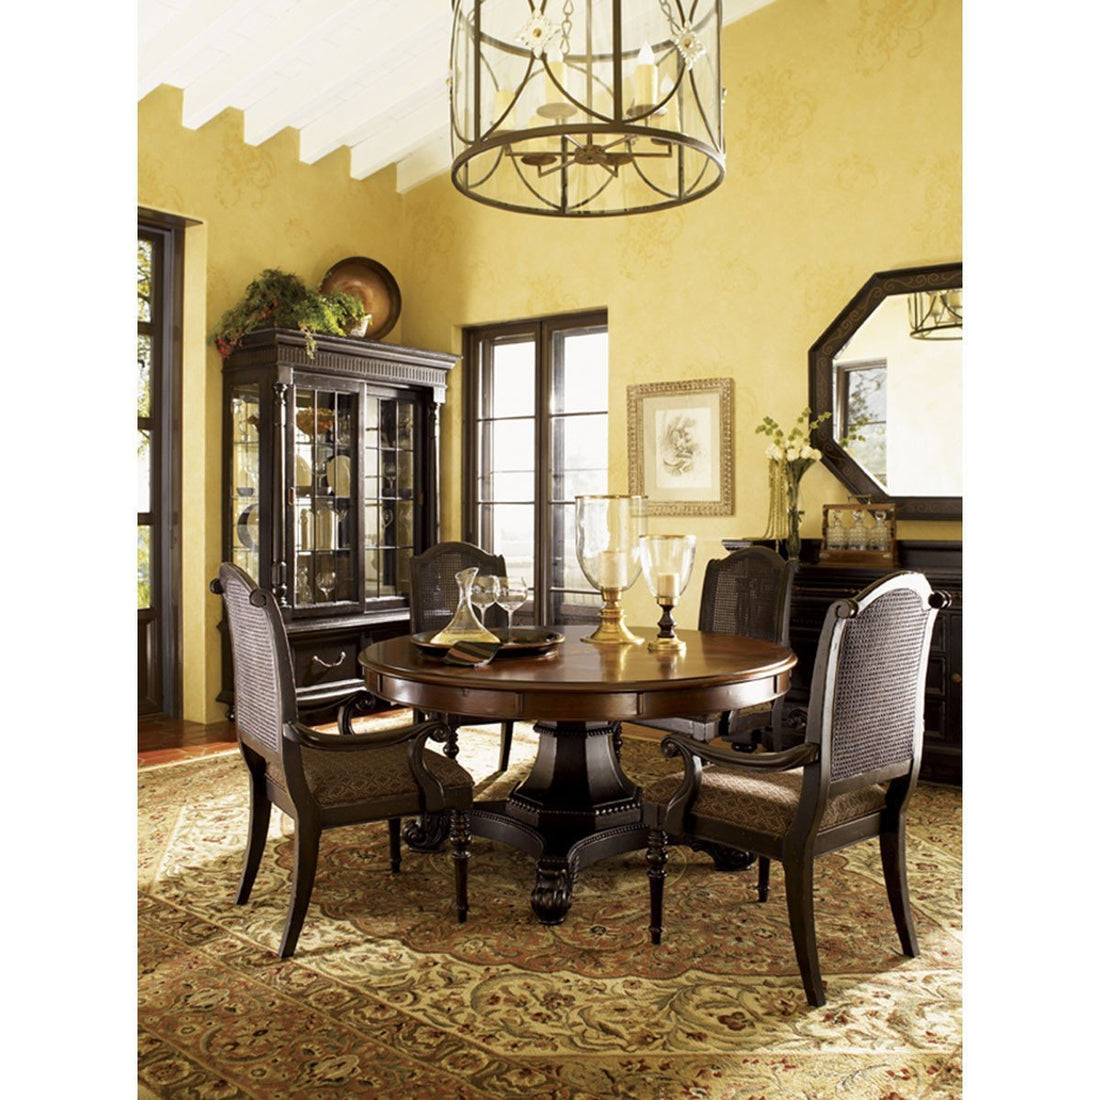 Tommy Bahama Kingstown Bonaire Round Dining Table 621-870C